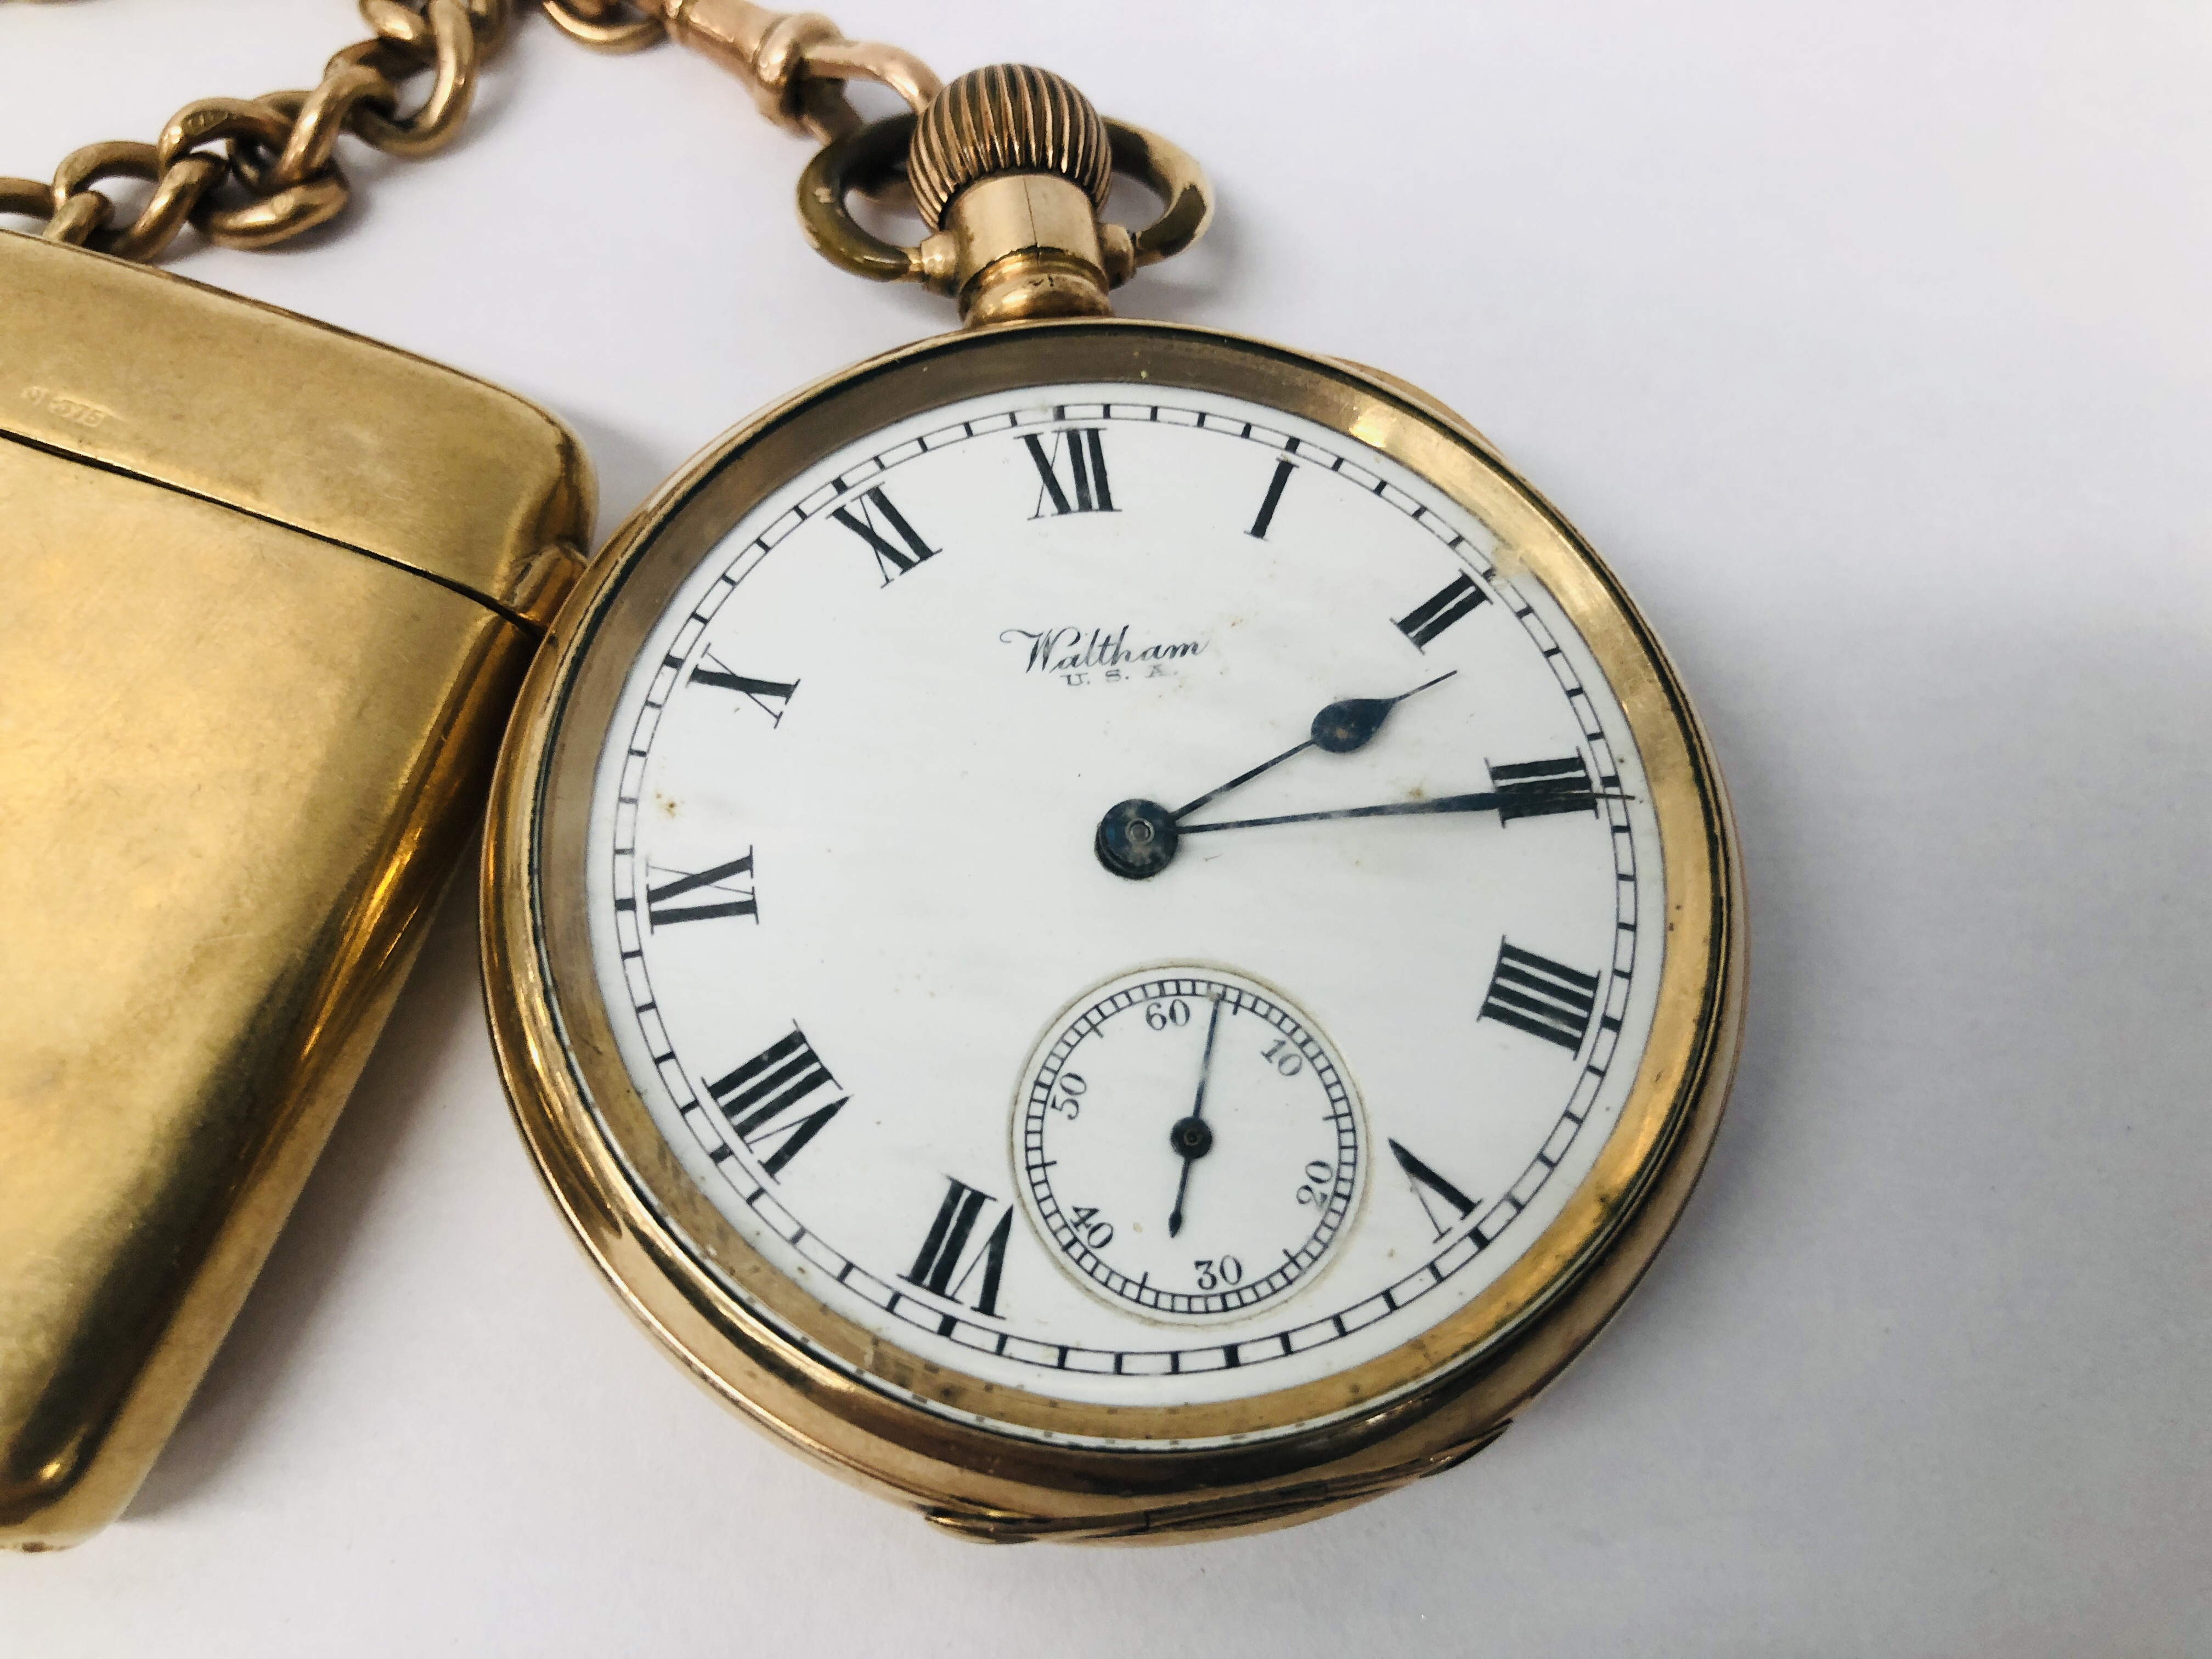 A WALTHAM GOLD PLATED POCKET WATCH ON 9CT GOLD WATCH CHAIN WITH A GEORGE V 1913 FULL SOVEREIGN COIN - Image 7 of 19